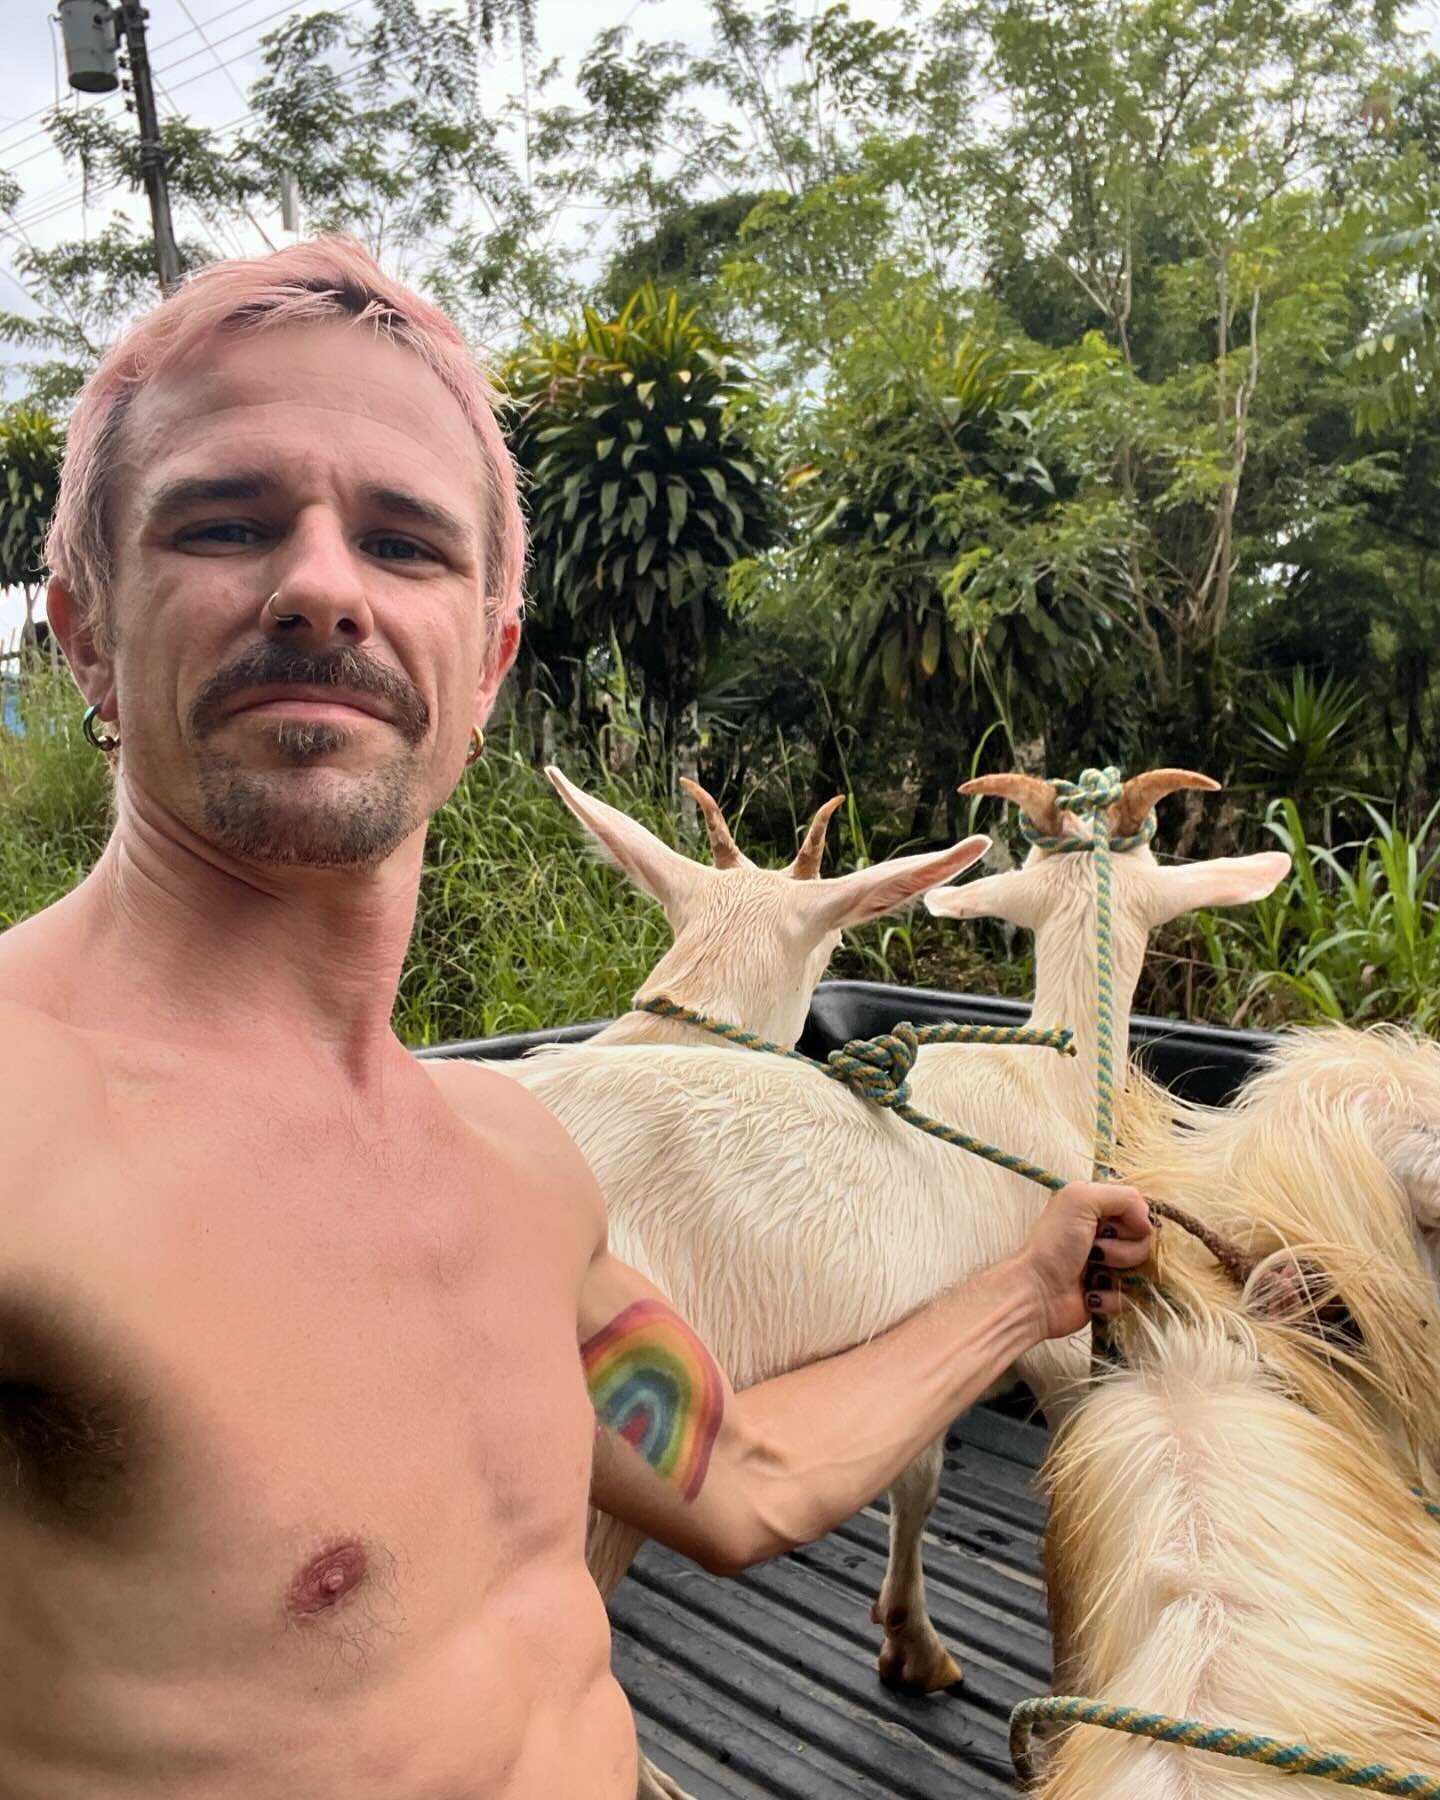 POV you&rsquo;re tryin&rsquo; to chill on a Saturday&hellip;but you have goats. Check out our latest reel to see this weekend&rsquo;s FULL unhinged farm adventure 🤪 #everythingisfine